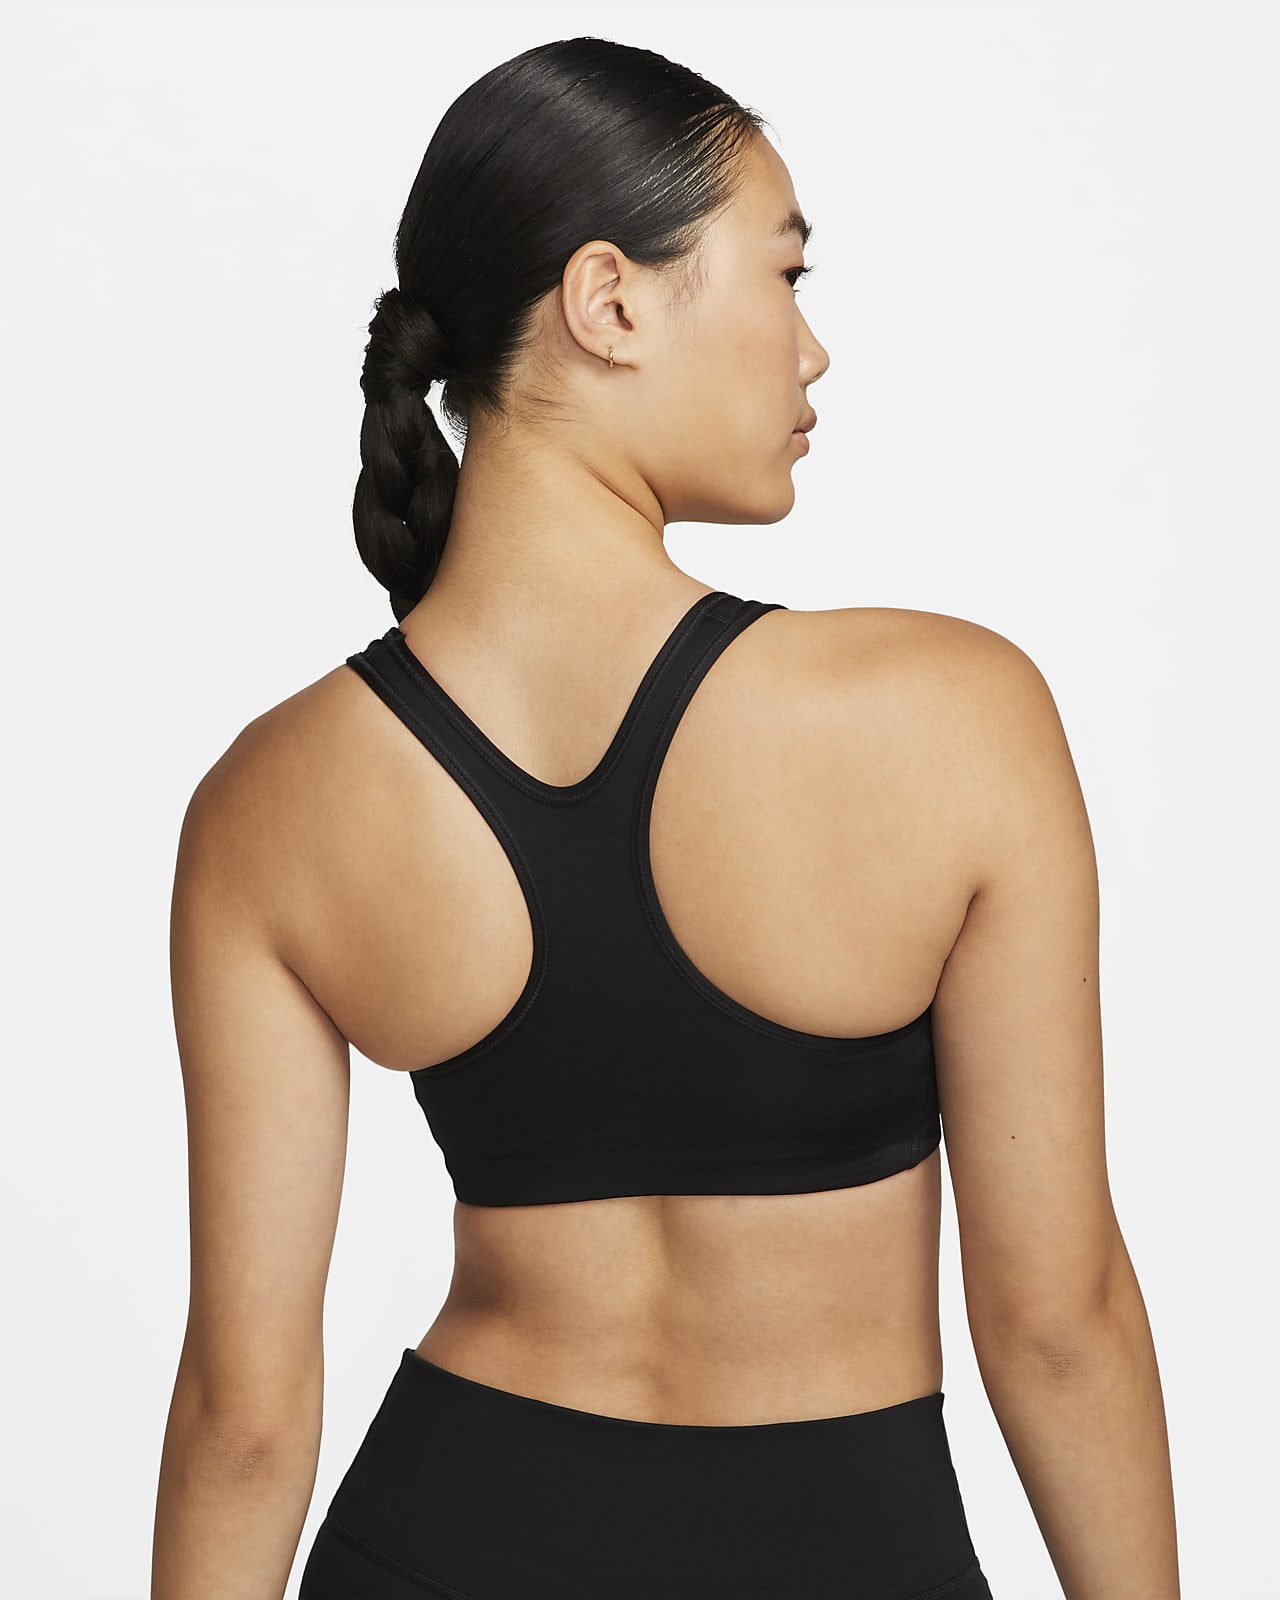 Nike Countries Sports Bras for Women